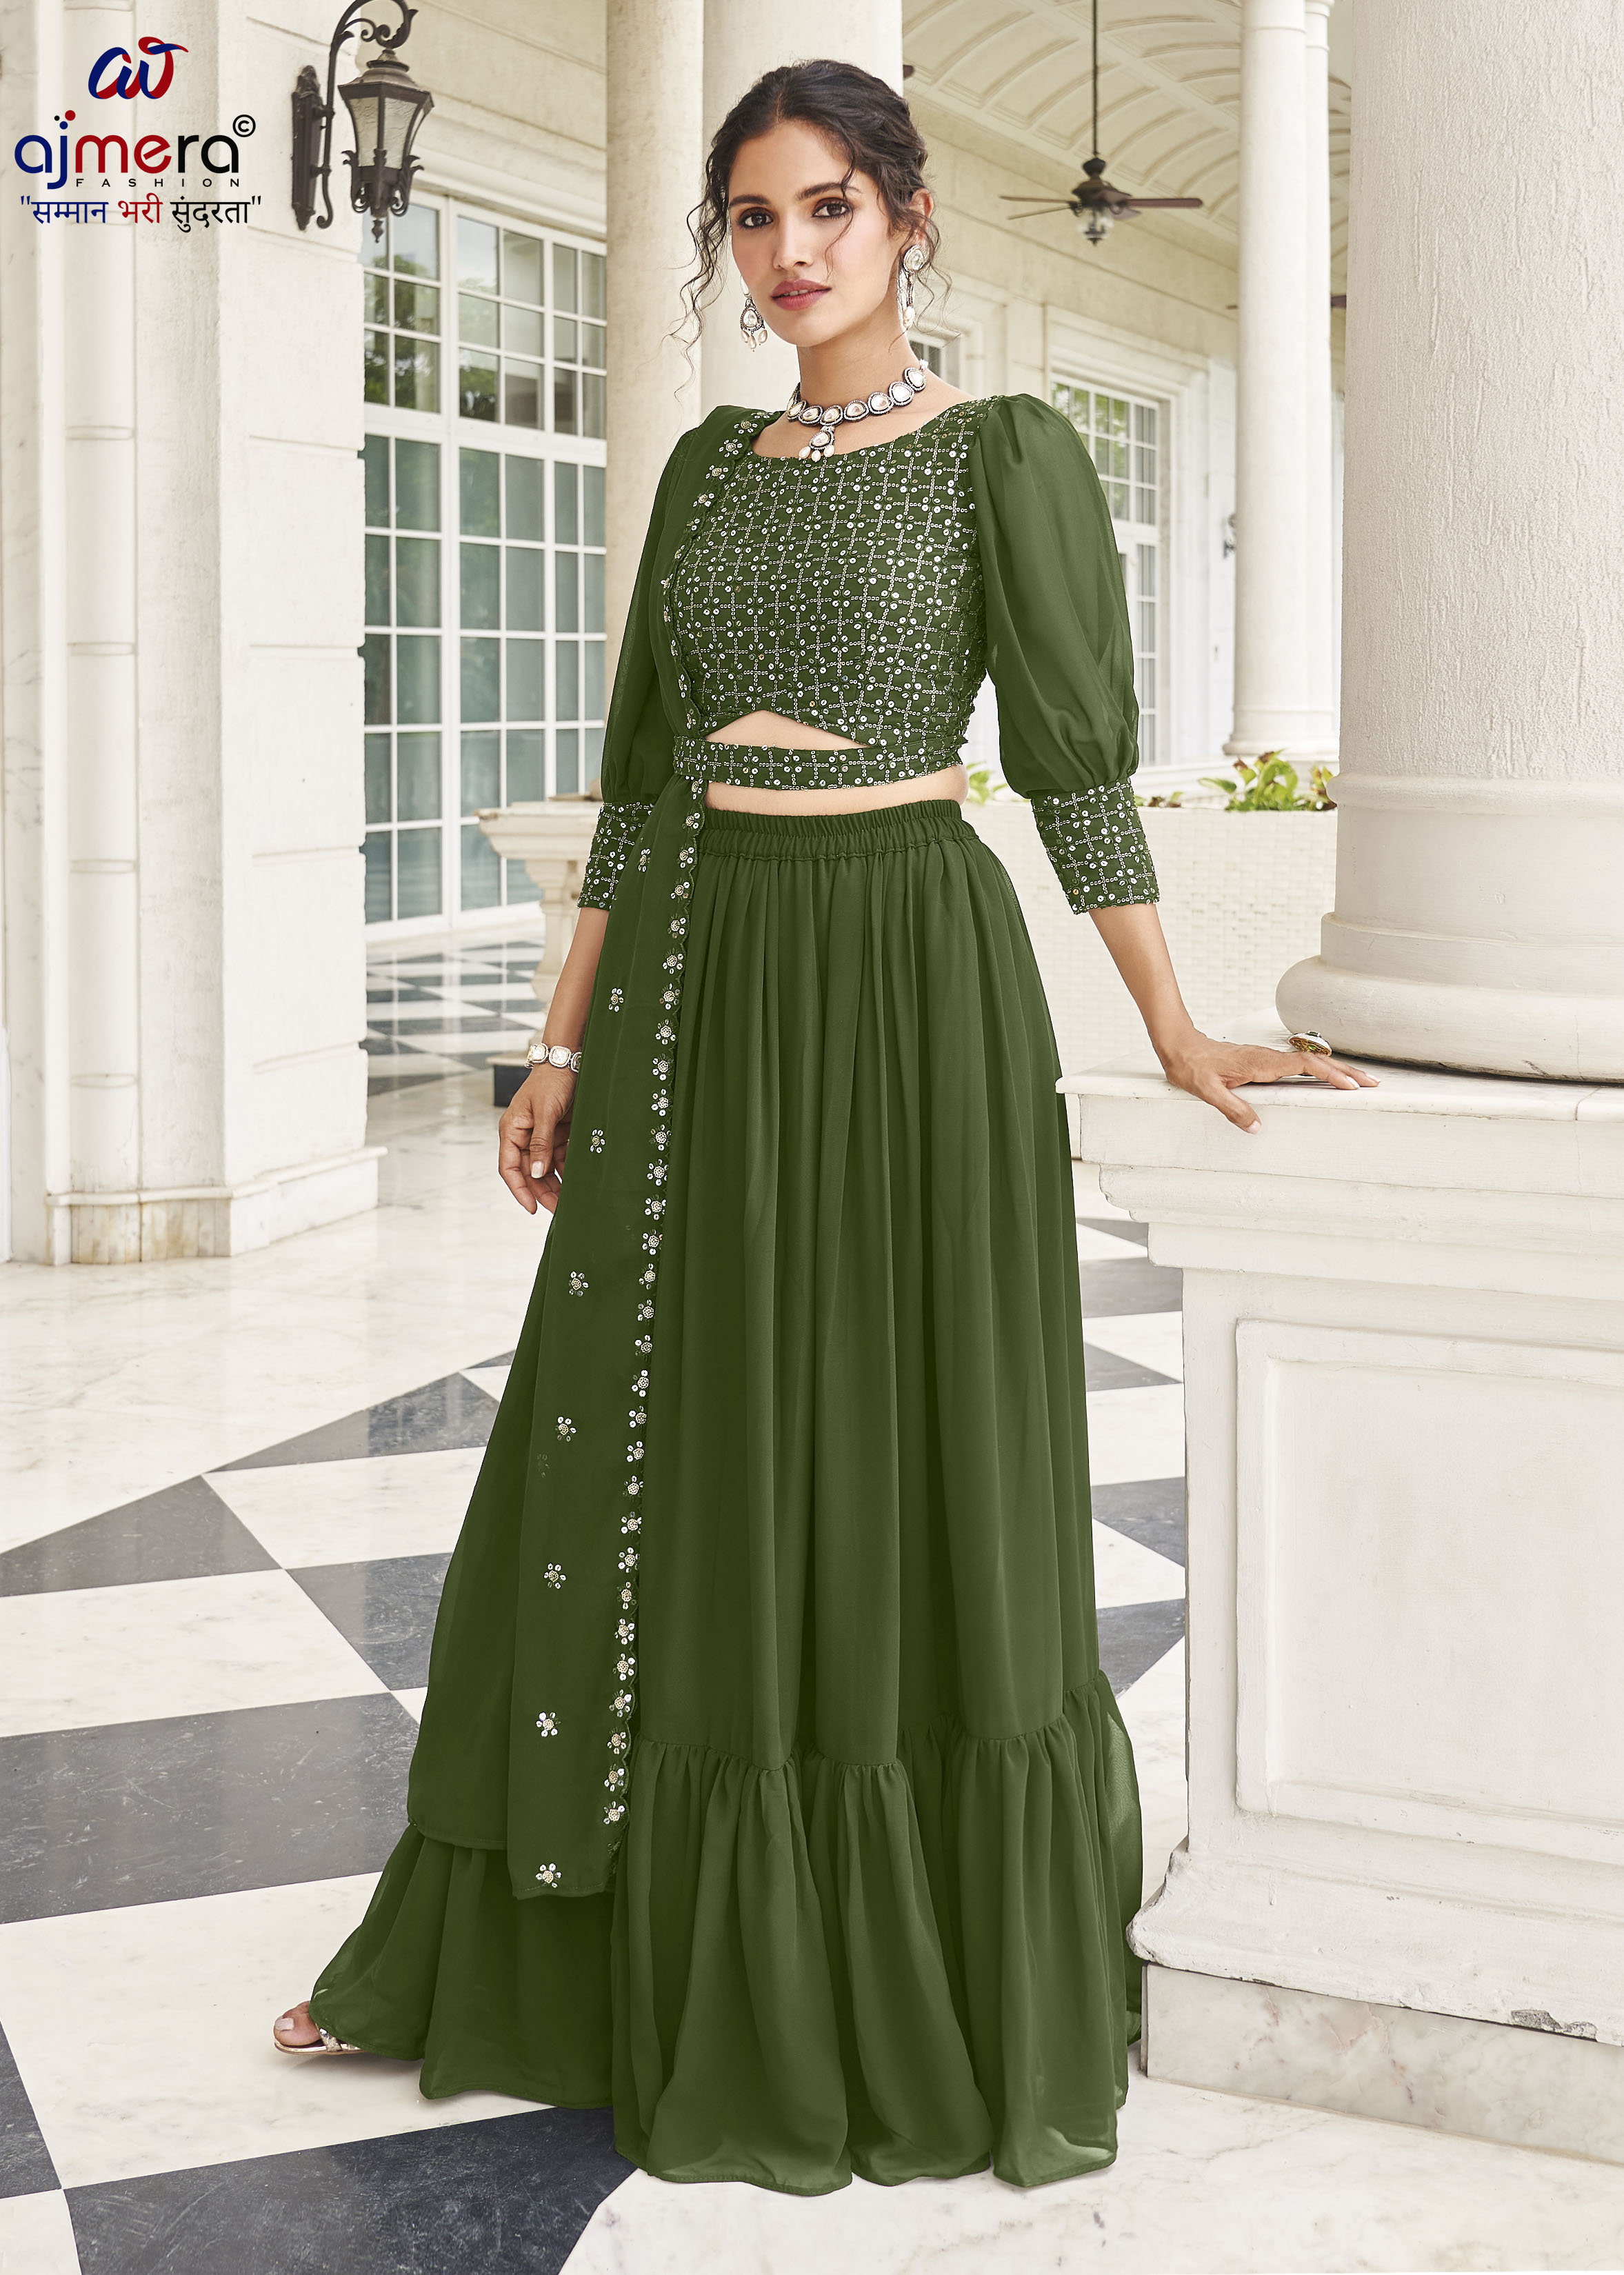 Partywear Lahenga Manufacturers, Suppliers in Lucknow